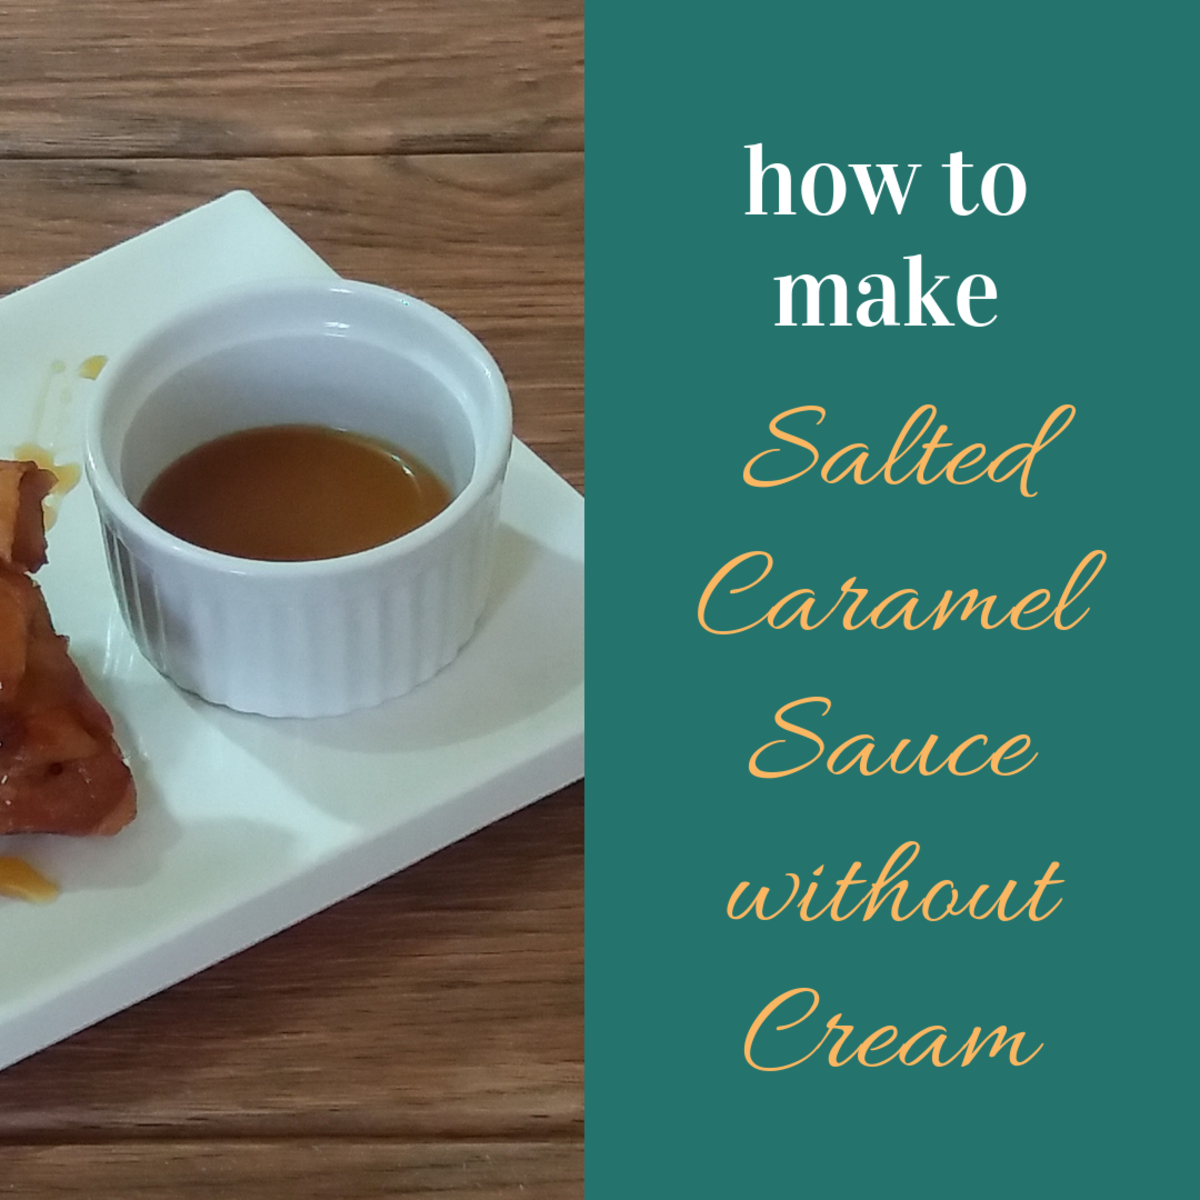 how to make salted caramel without cream